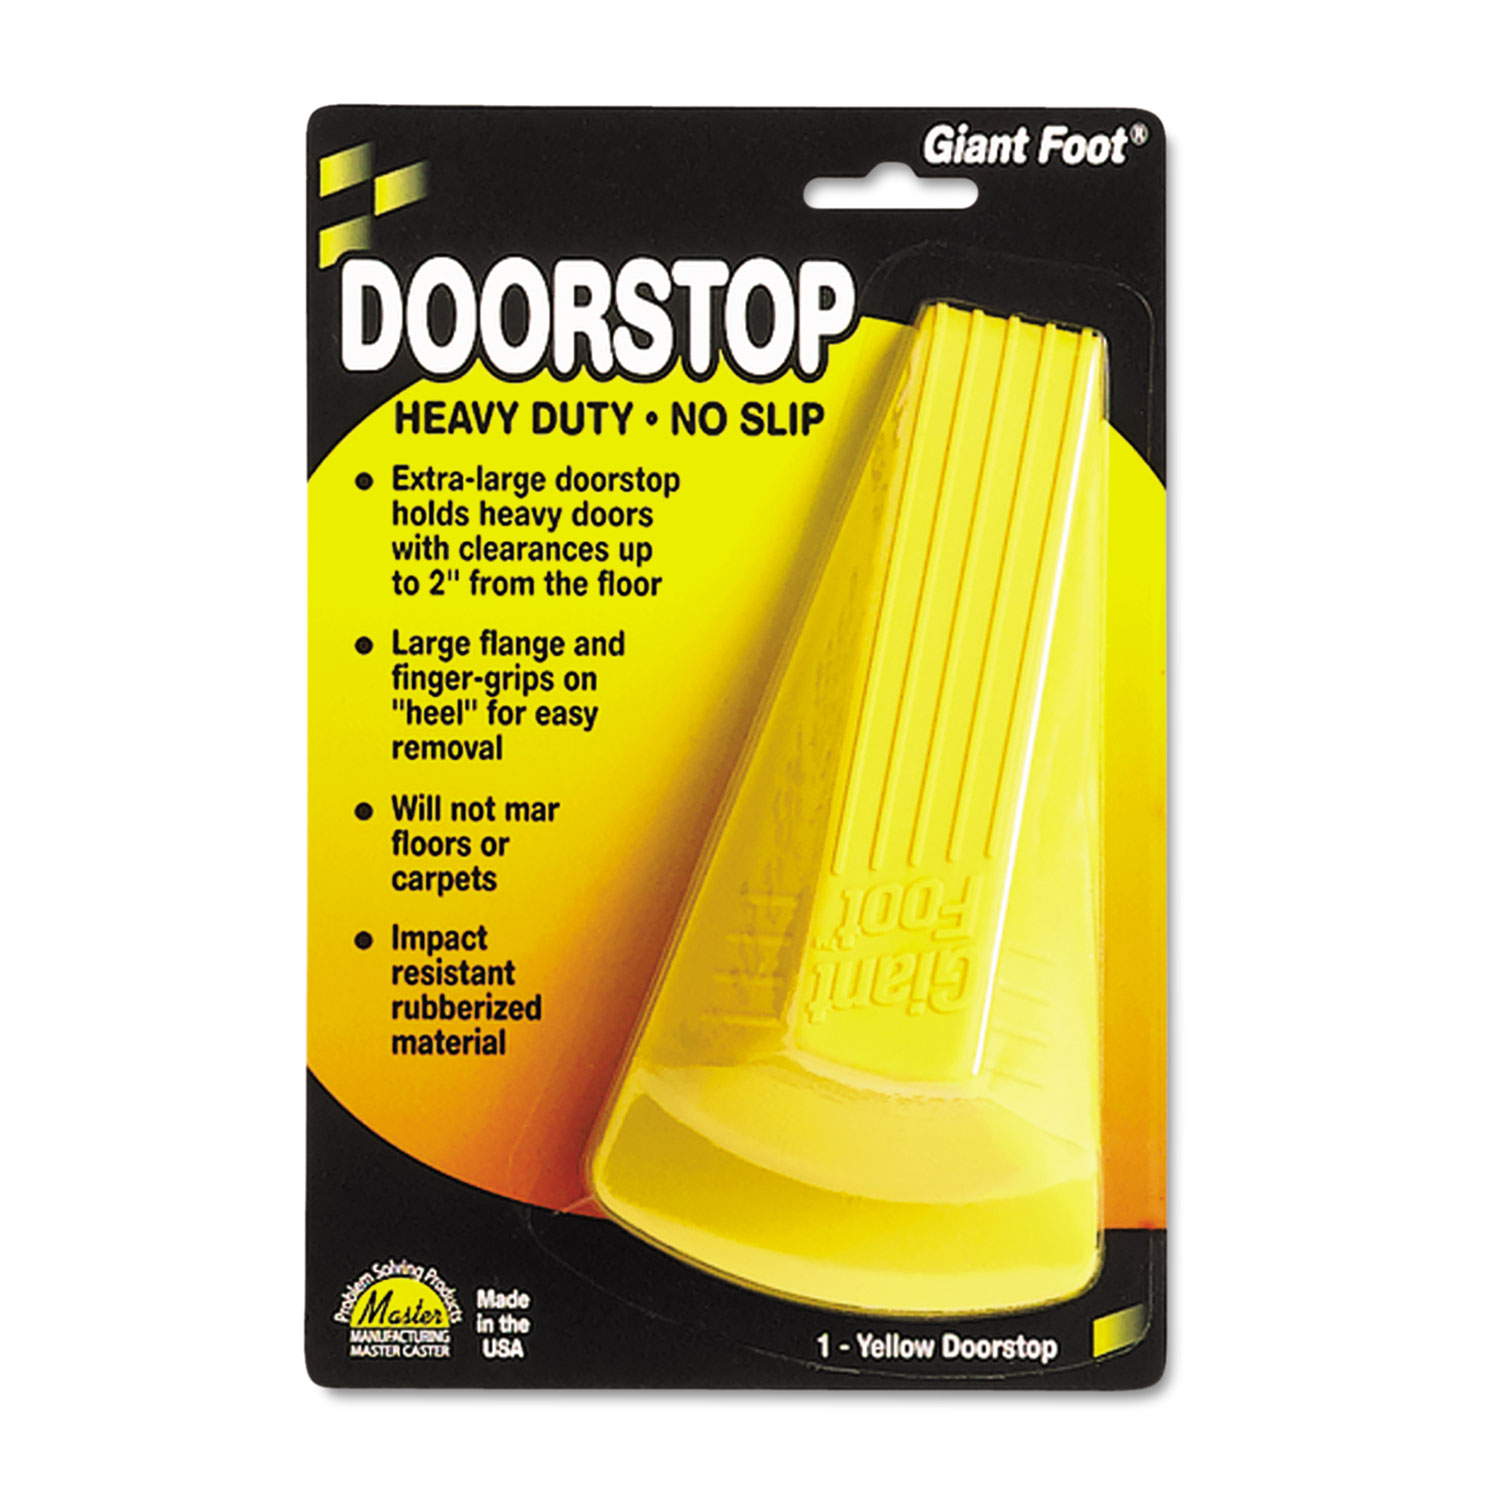  Master Caster 00966 Giant Foot Doorstop, No-Slip Rubber Wedge, 3.5w x 6.75d x 2h, Safety Yellow (MAS00966) 